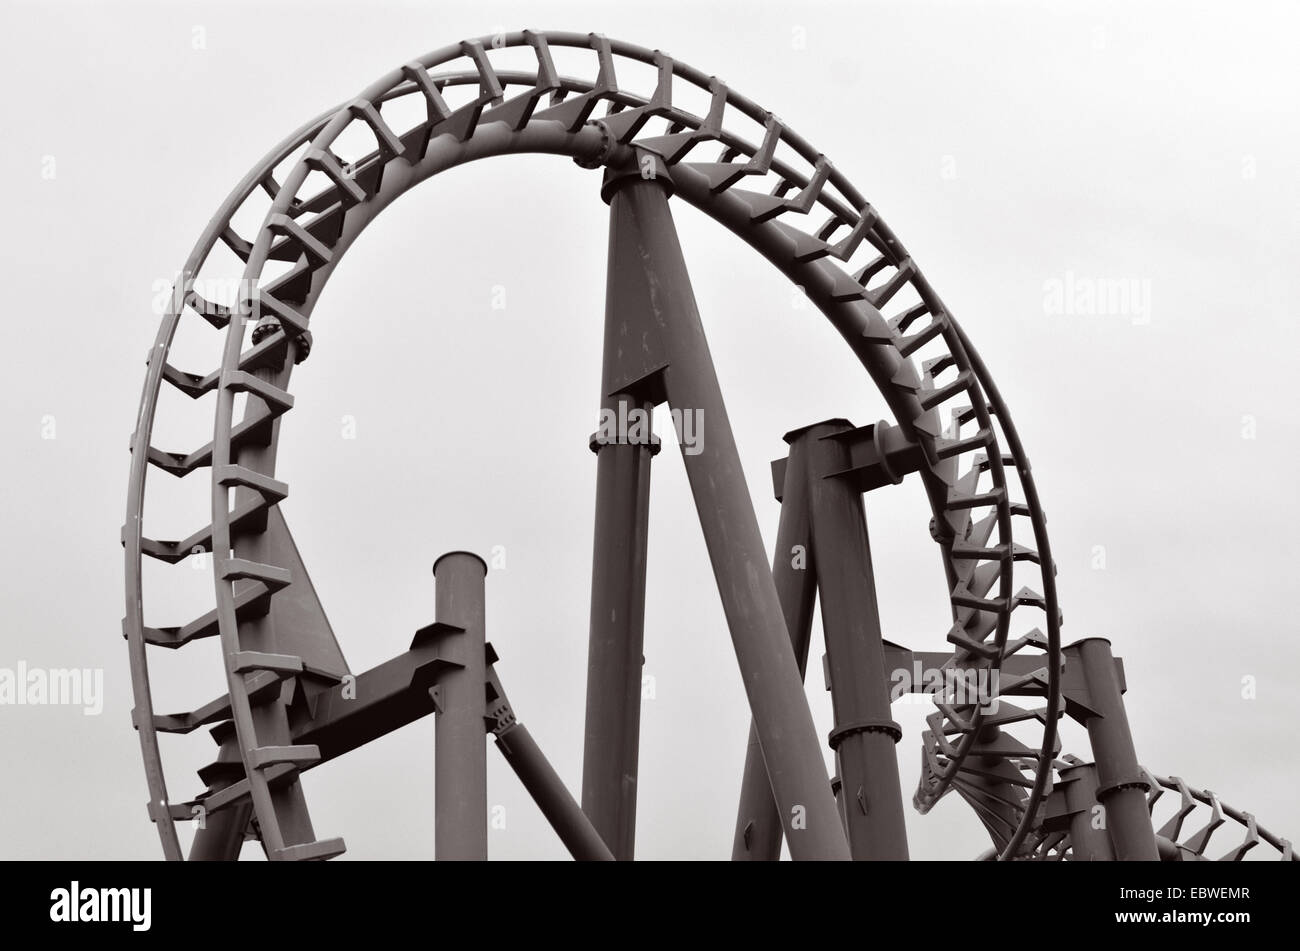 Rollercoaster Support Stock Photos & Rollercoaster Support Stock Images ...